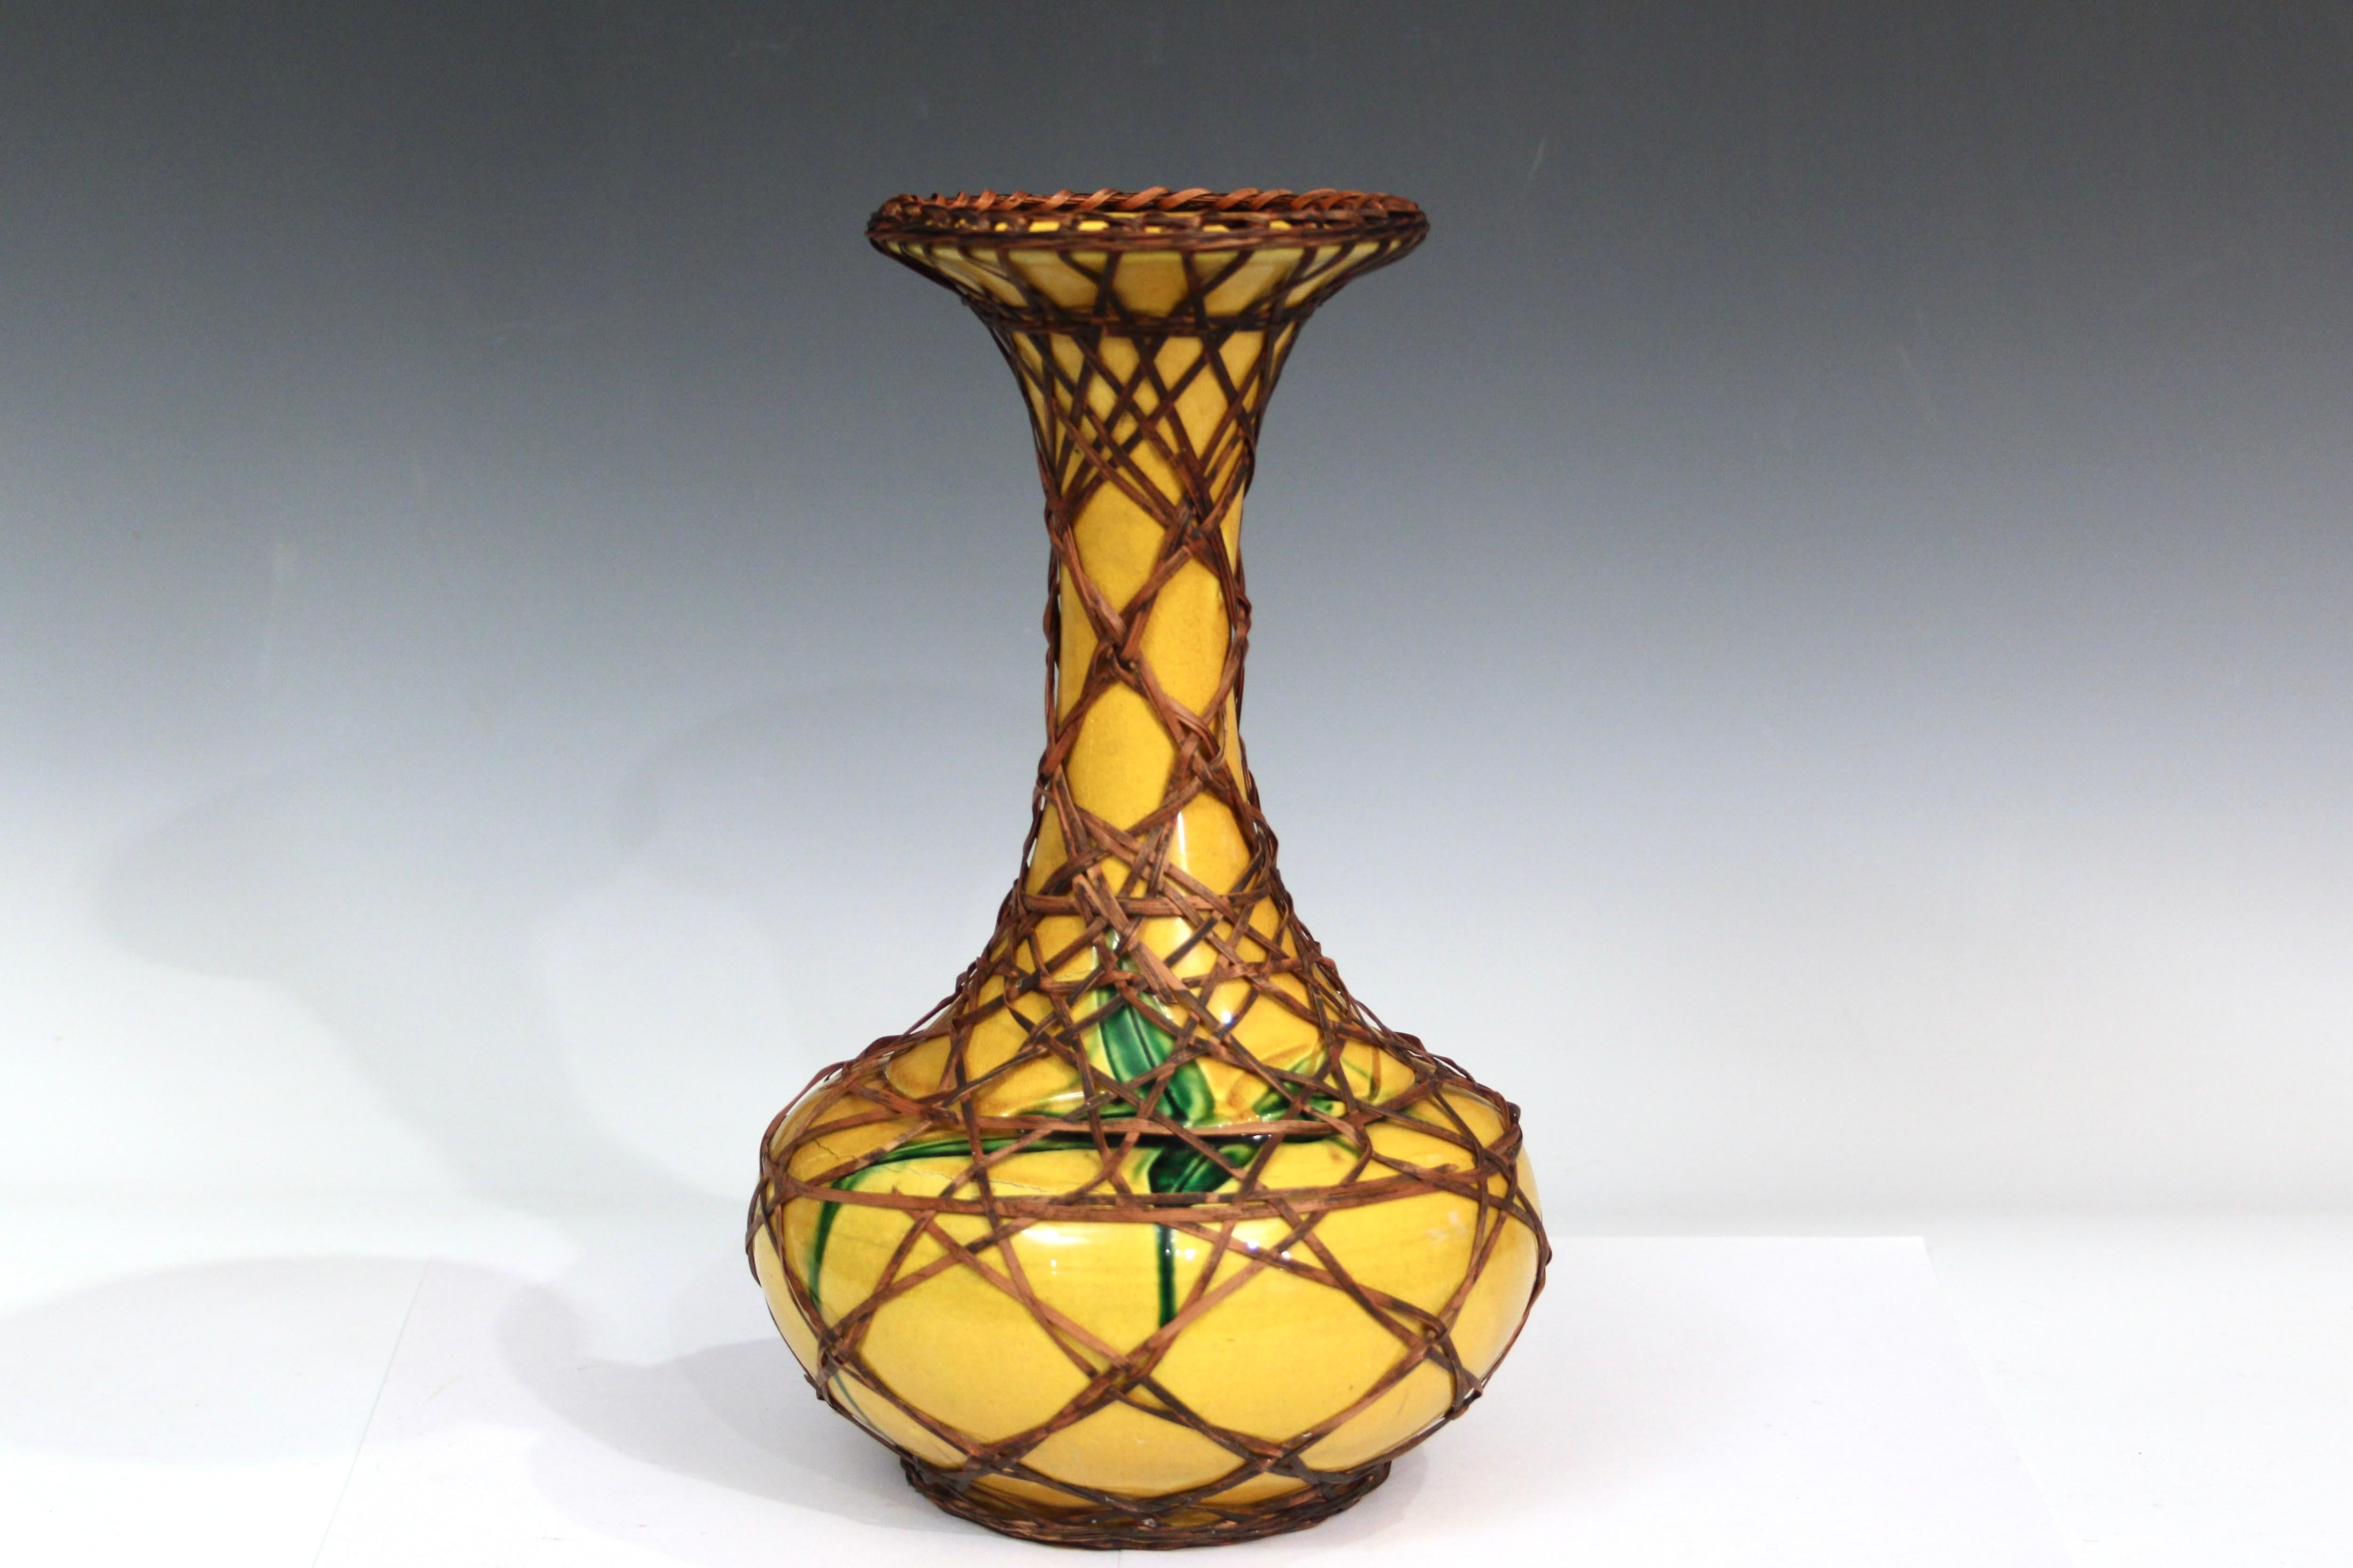 Japanese Awaji pottery vase with split bamboo weaving. Bottle form vase with flaring mouth in bright, warm yellow glaze with incised bamboo motif glazed in green. 12